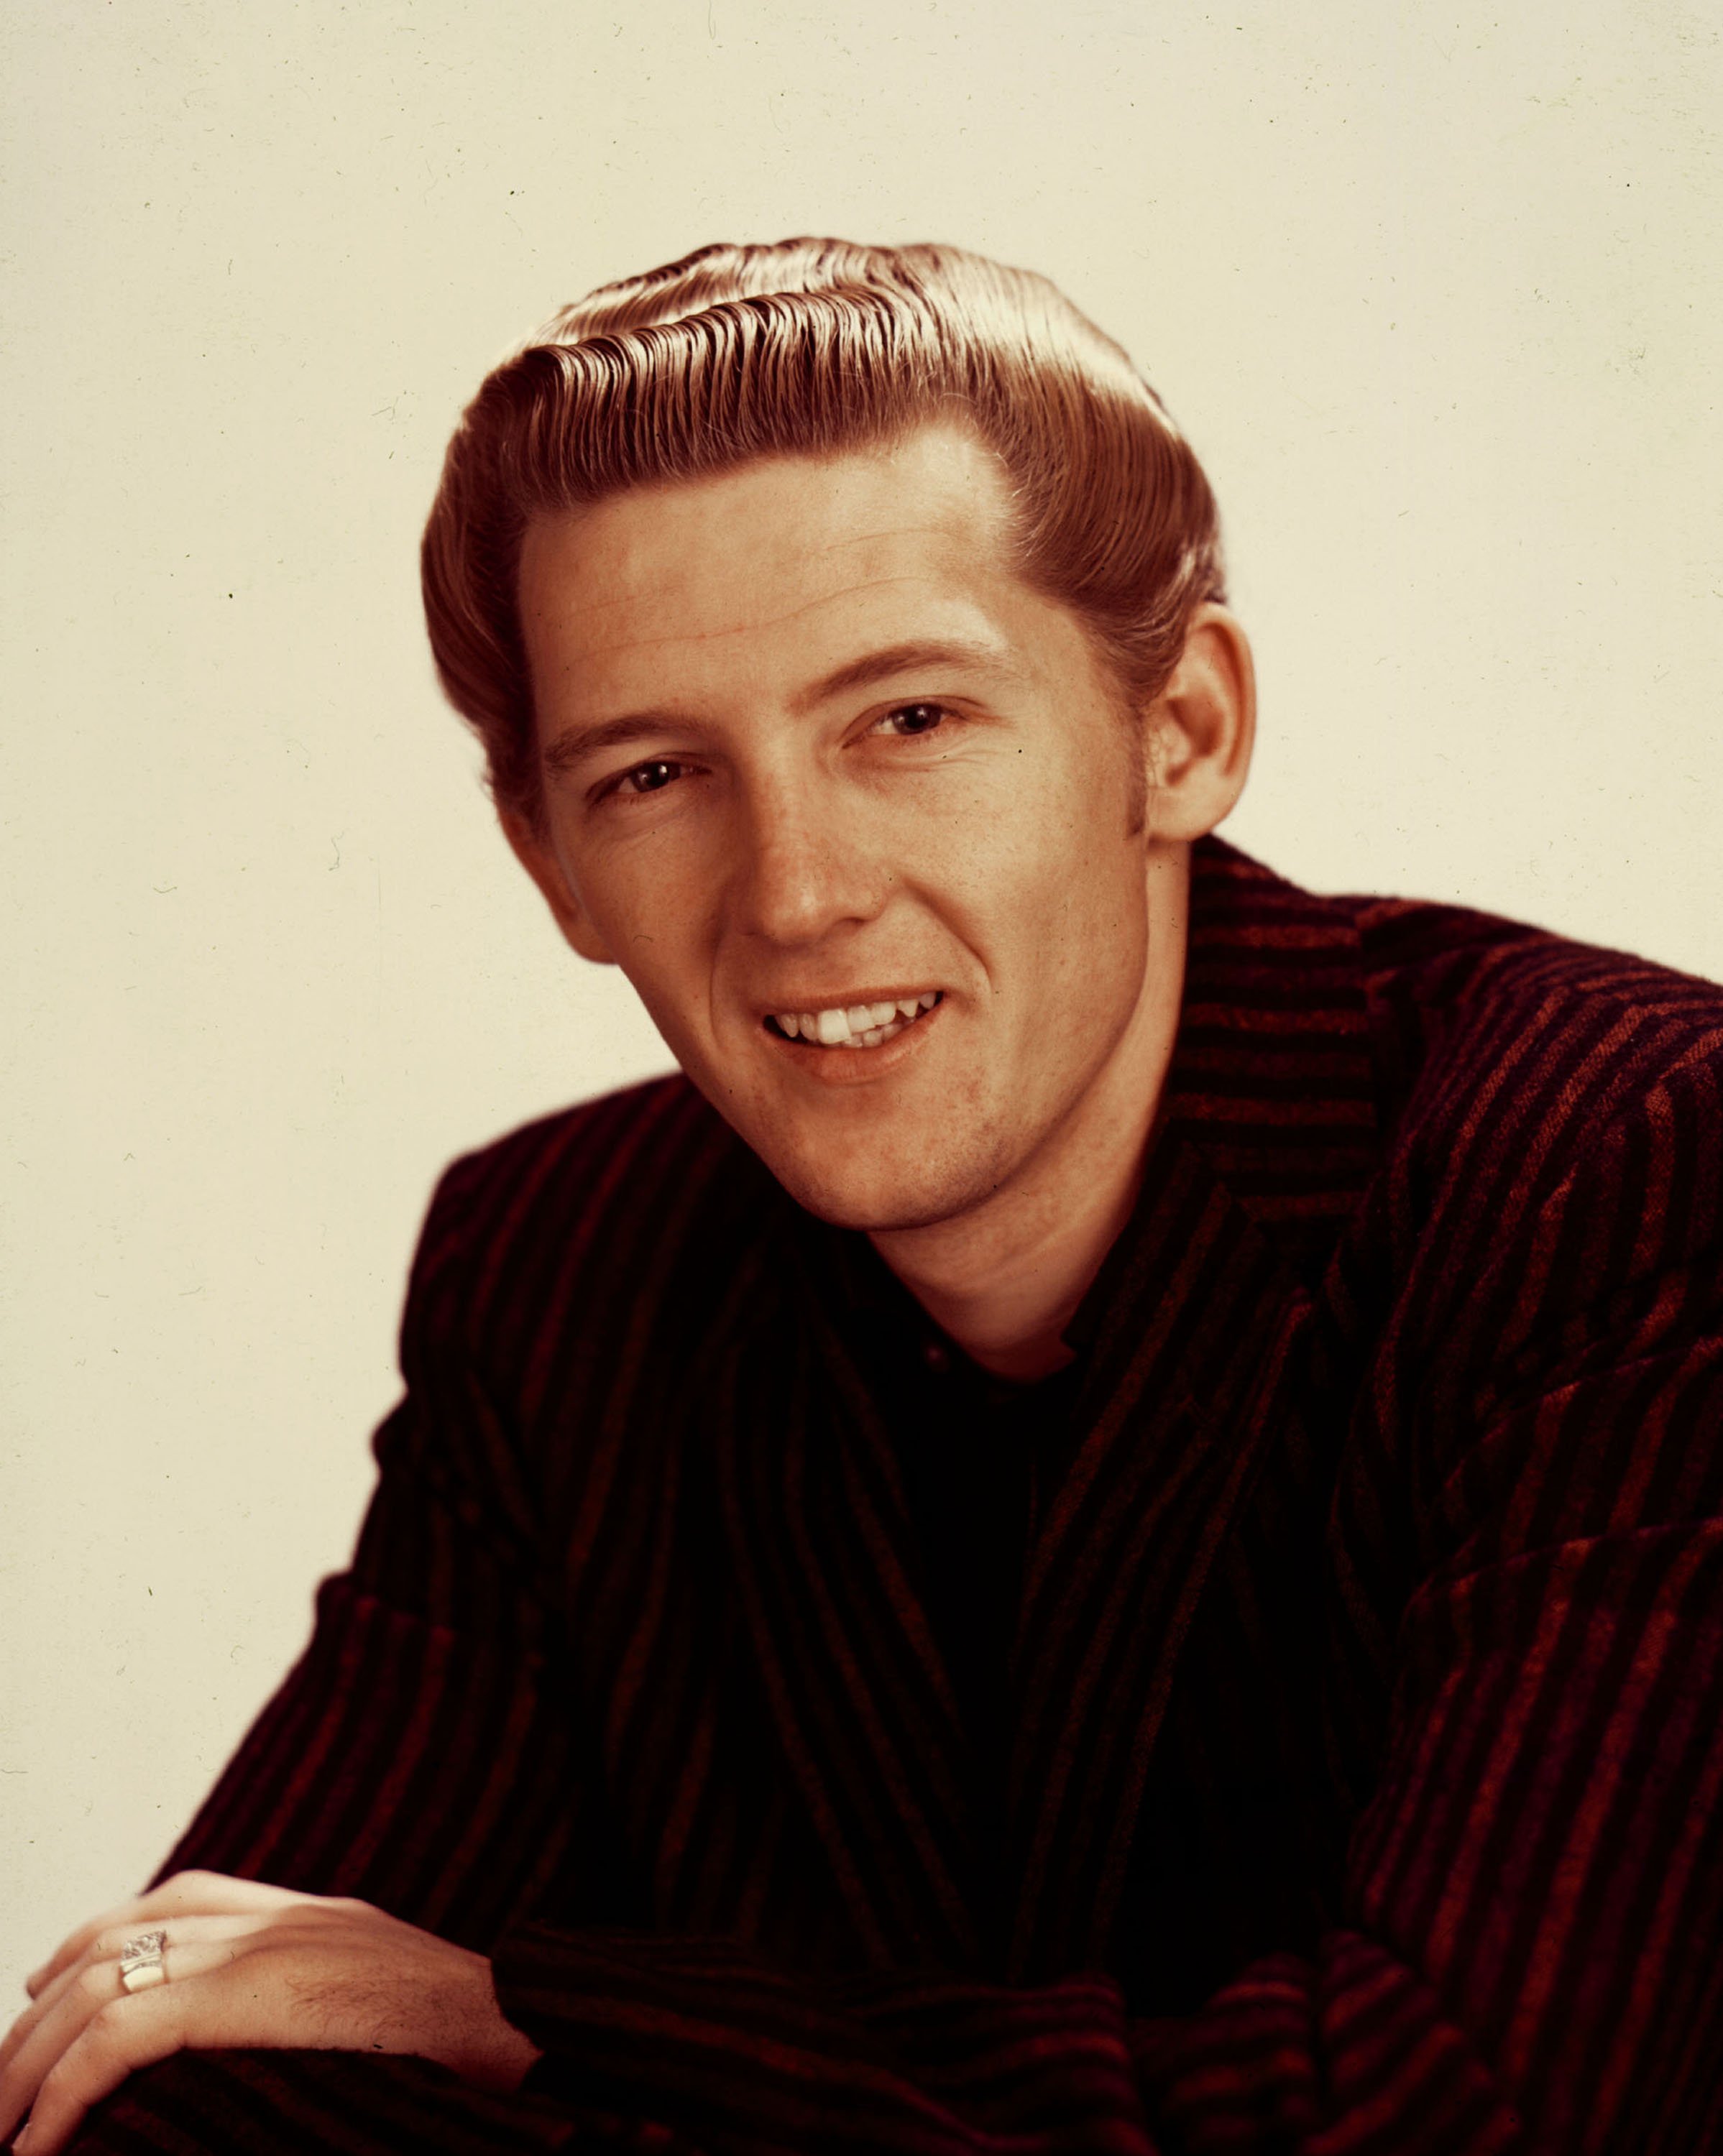 Rock 'n roll singer Jerry Lee Lewis poses for a portrait in the late 1950 | Photo: Getty Images